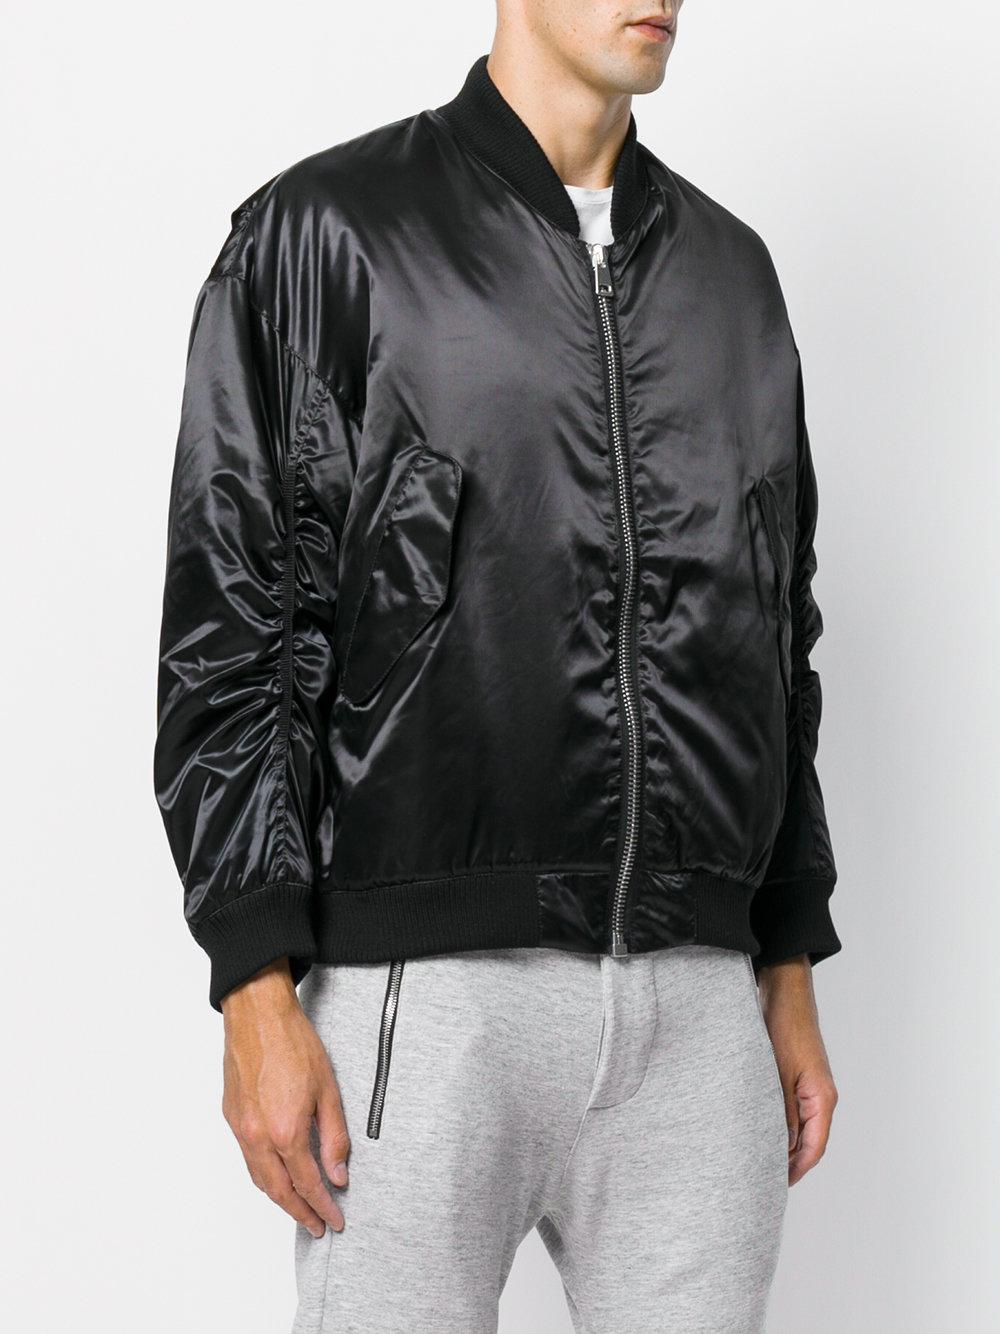 Represent Synthetic Classic Bomber Jacket in Black for Men - Lyst